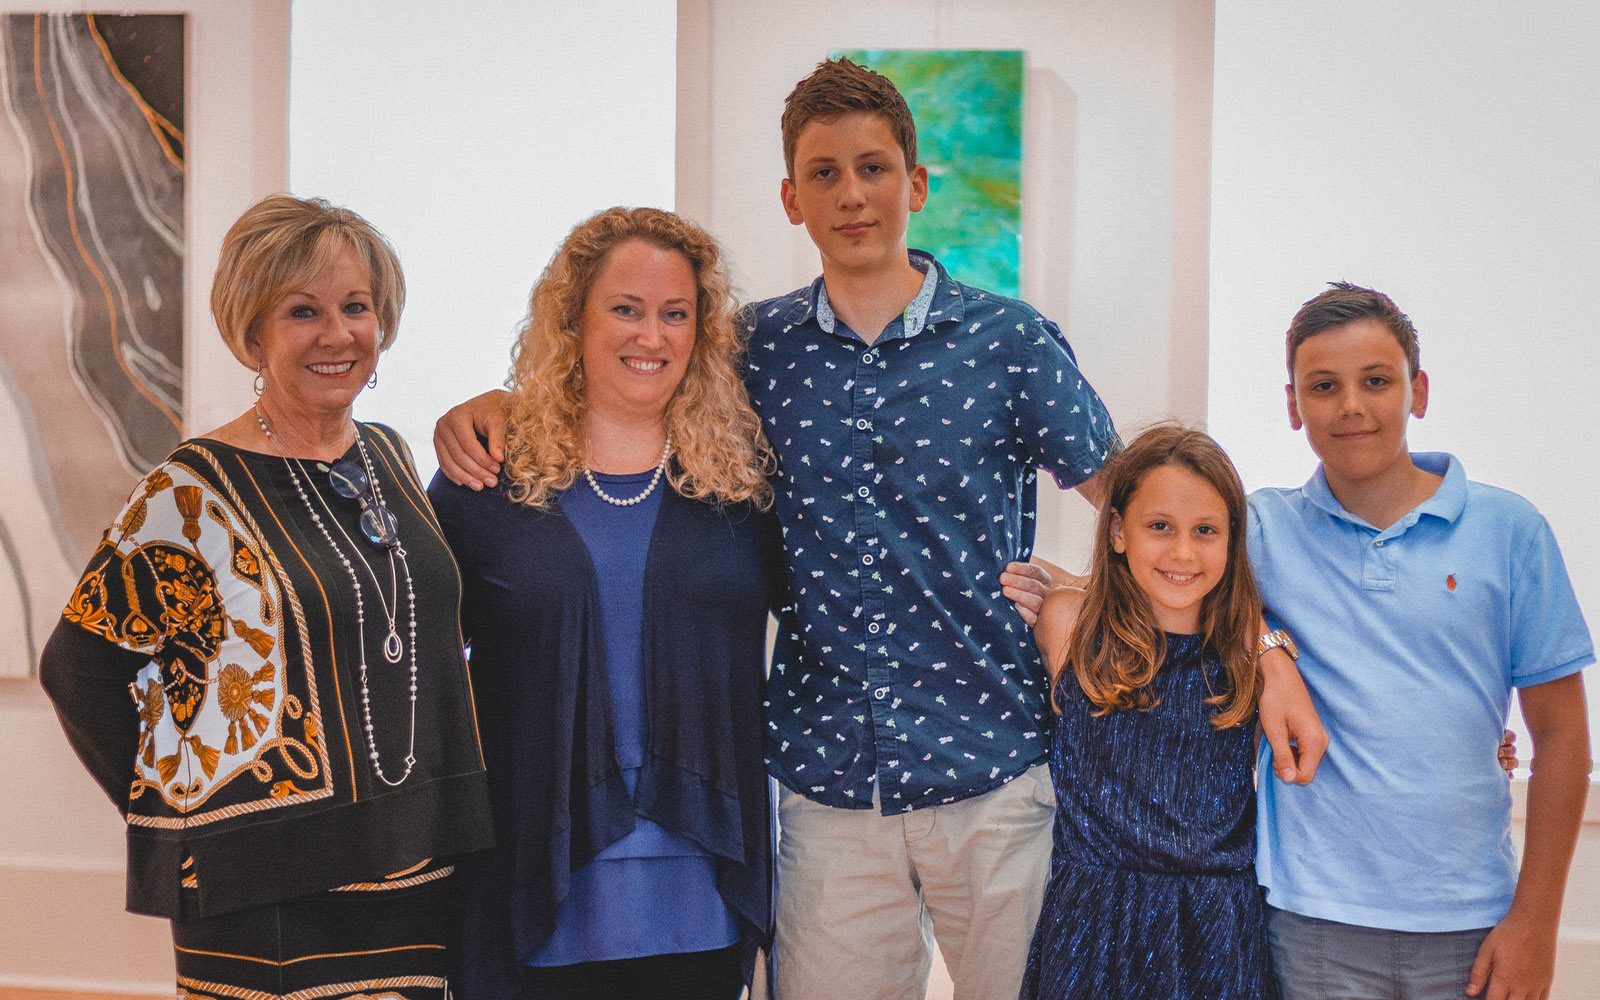 Guests and patrons attend soft opening for art gallery and studio